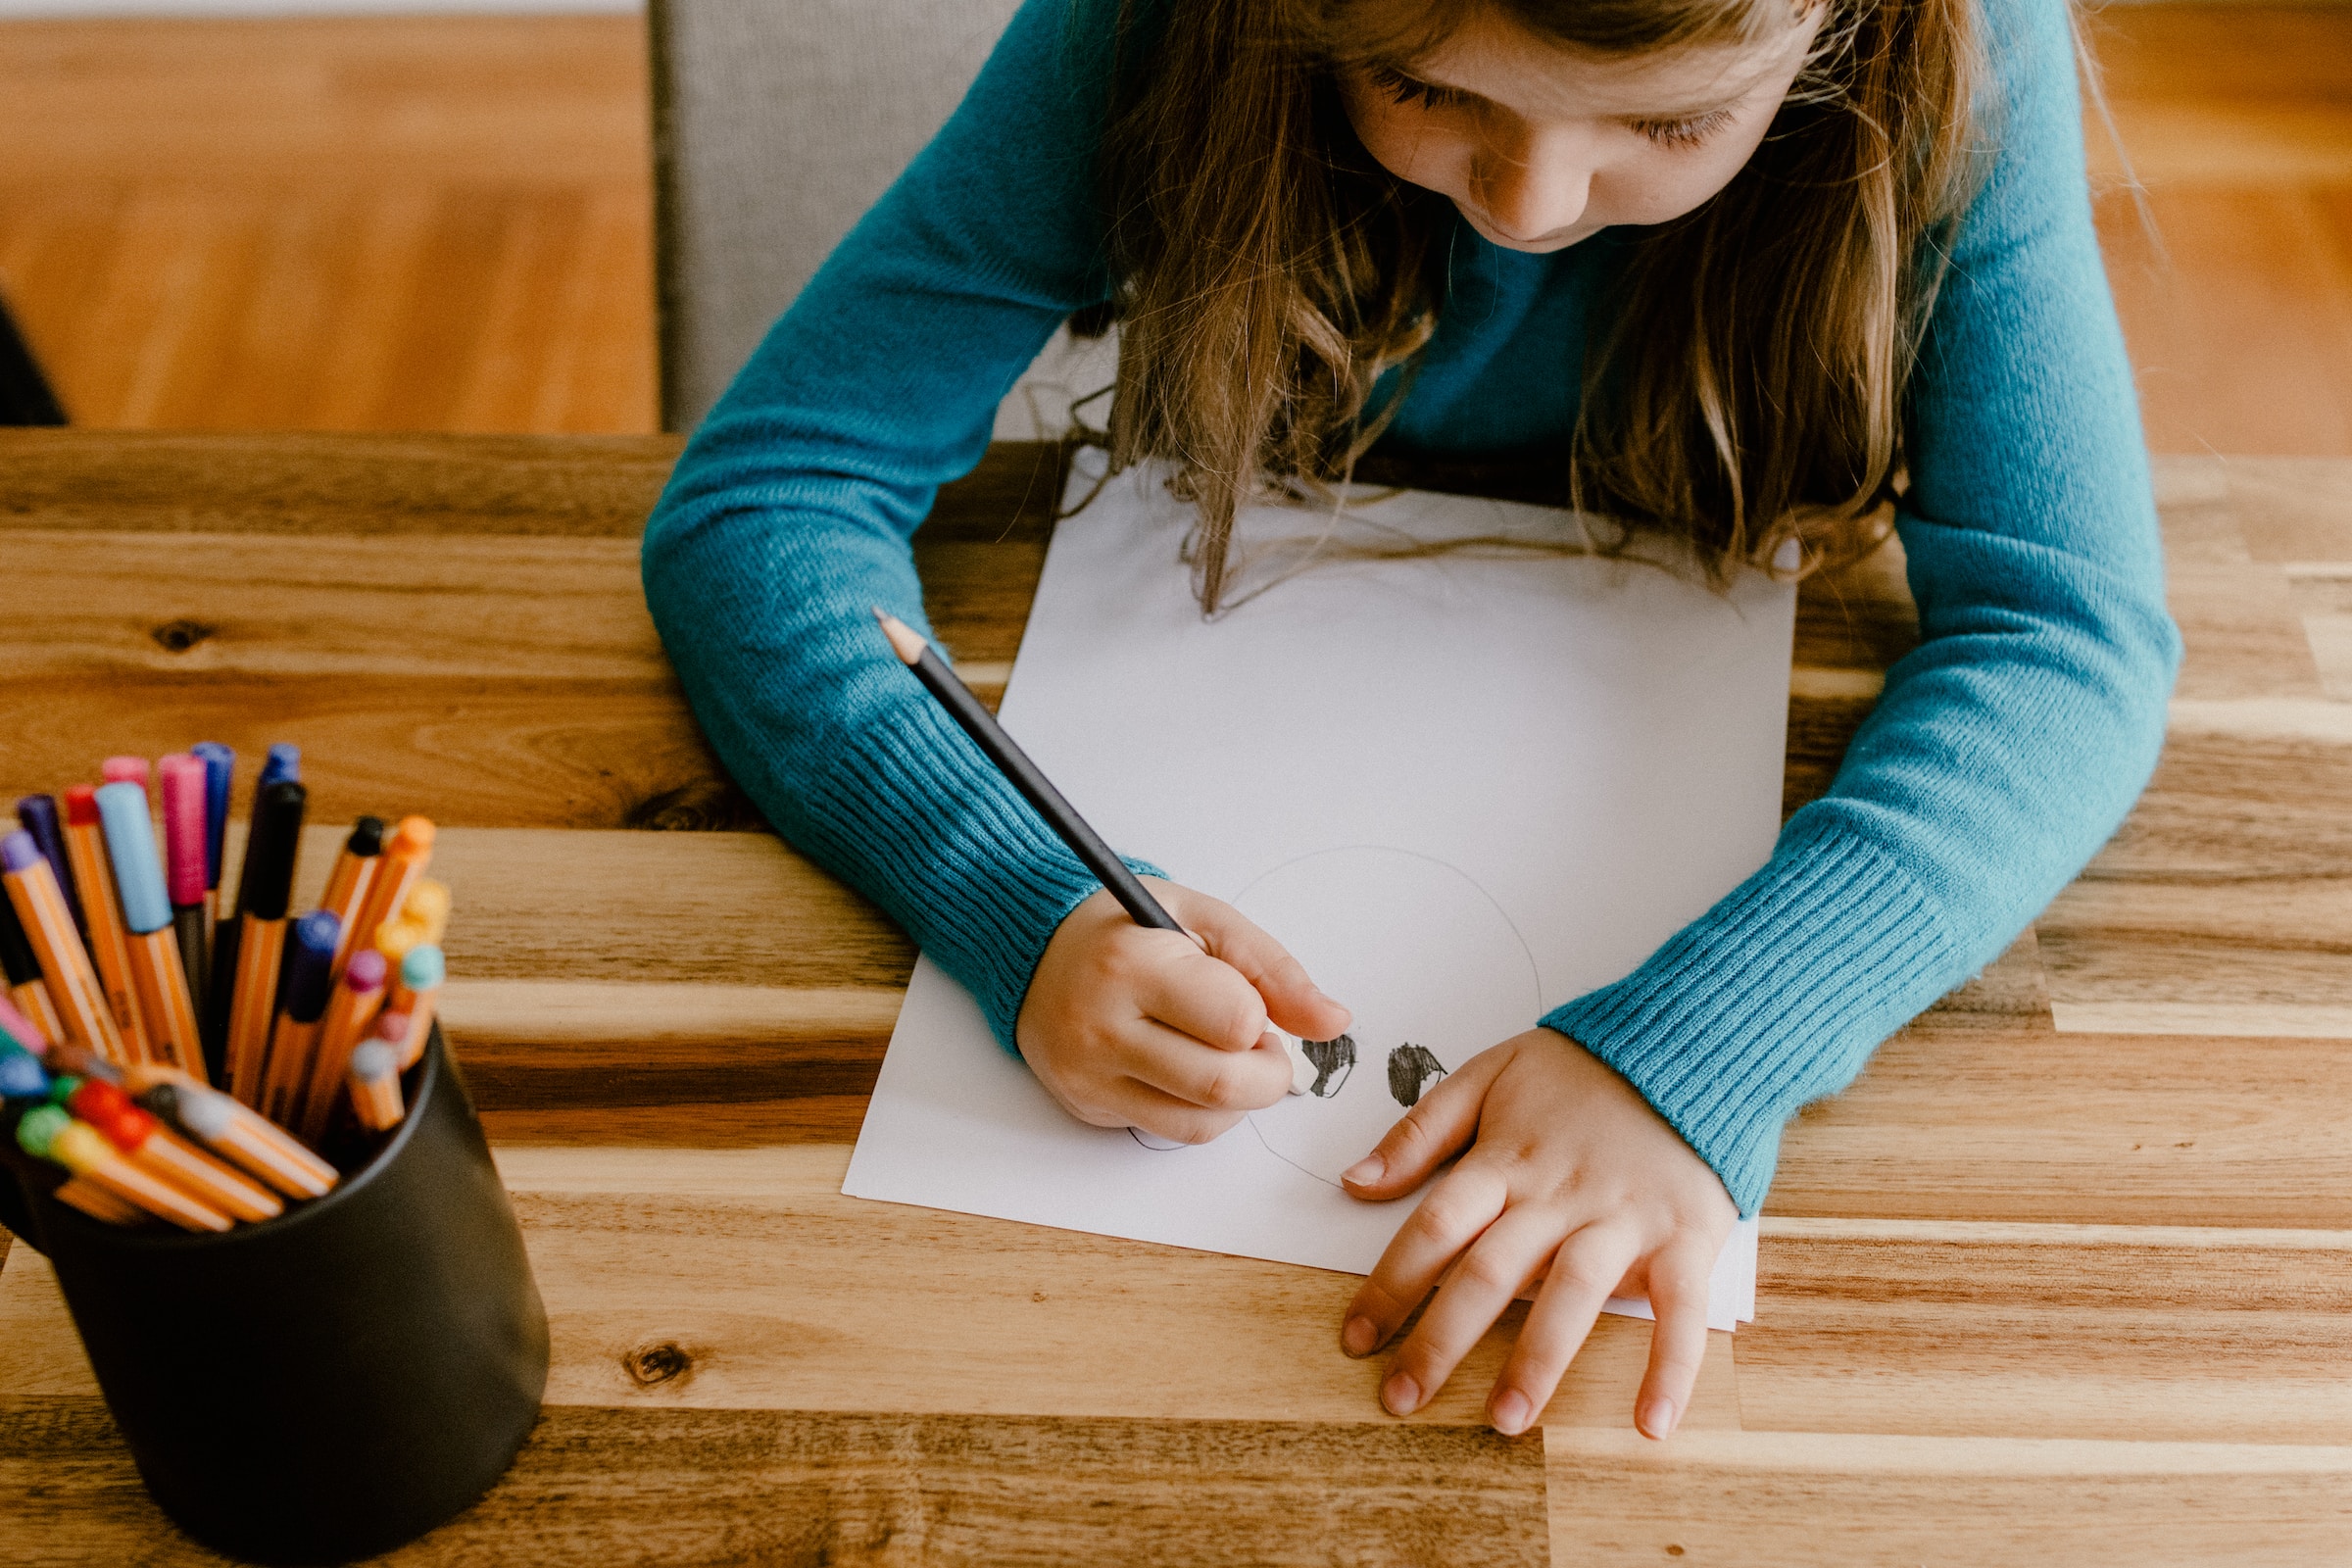 A little girl sketching on a piece of paper | Source: Unsplash